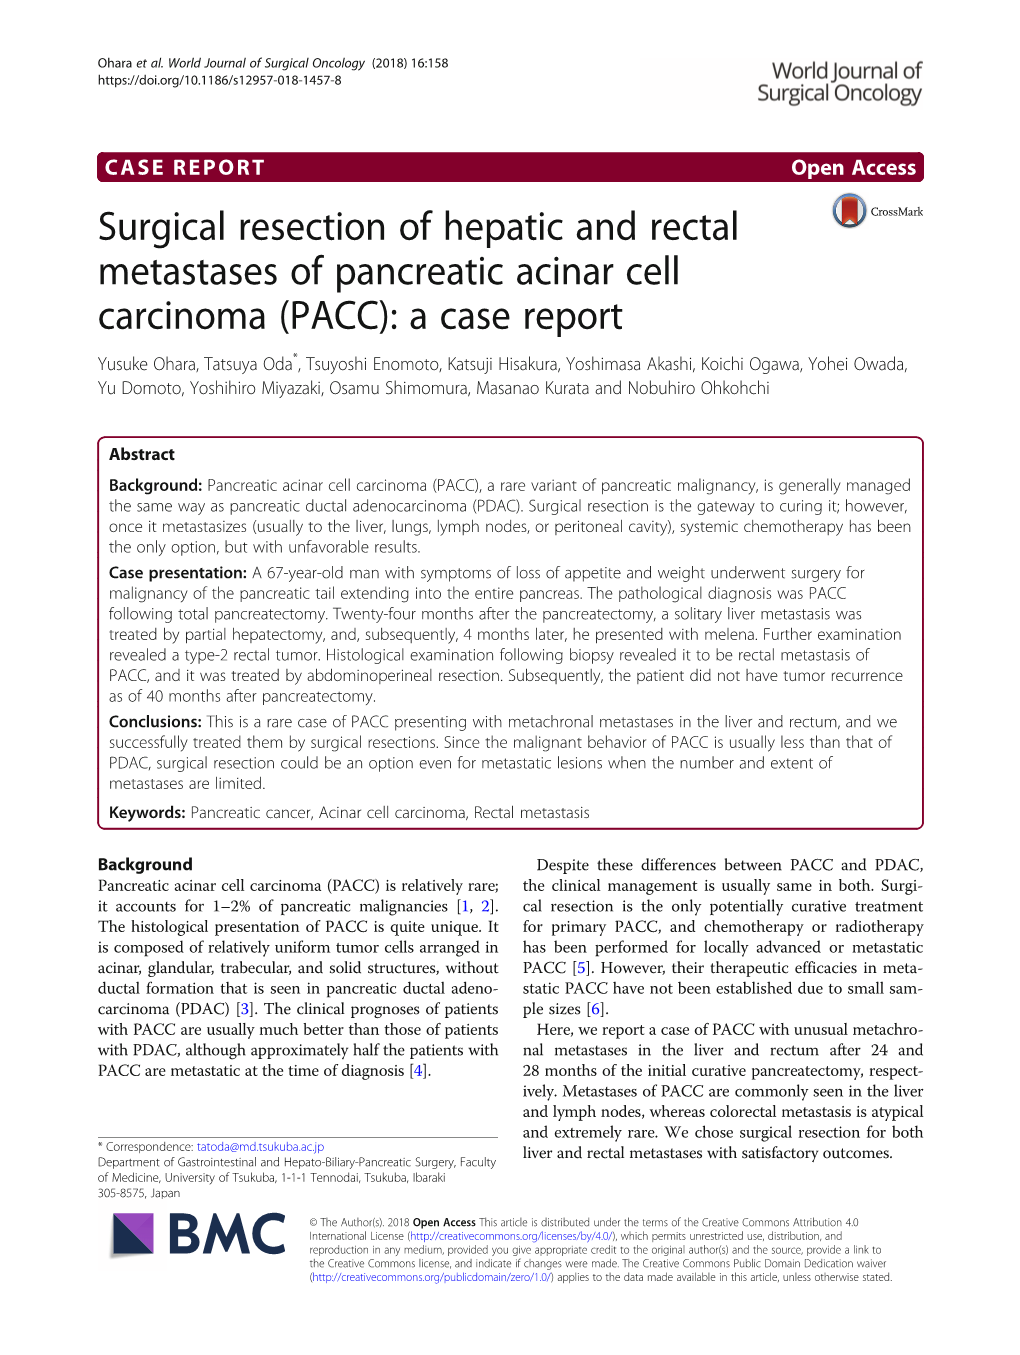 Surgical Resection of Hepatic and Rectal Metastases of Pancreatic Acinar Cell Carcinoma (PACC): a Case Report